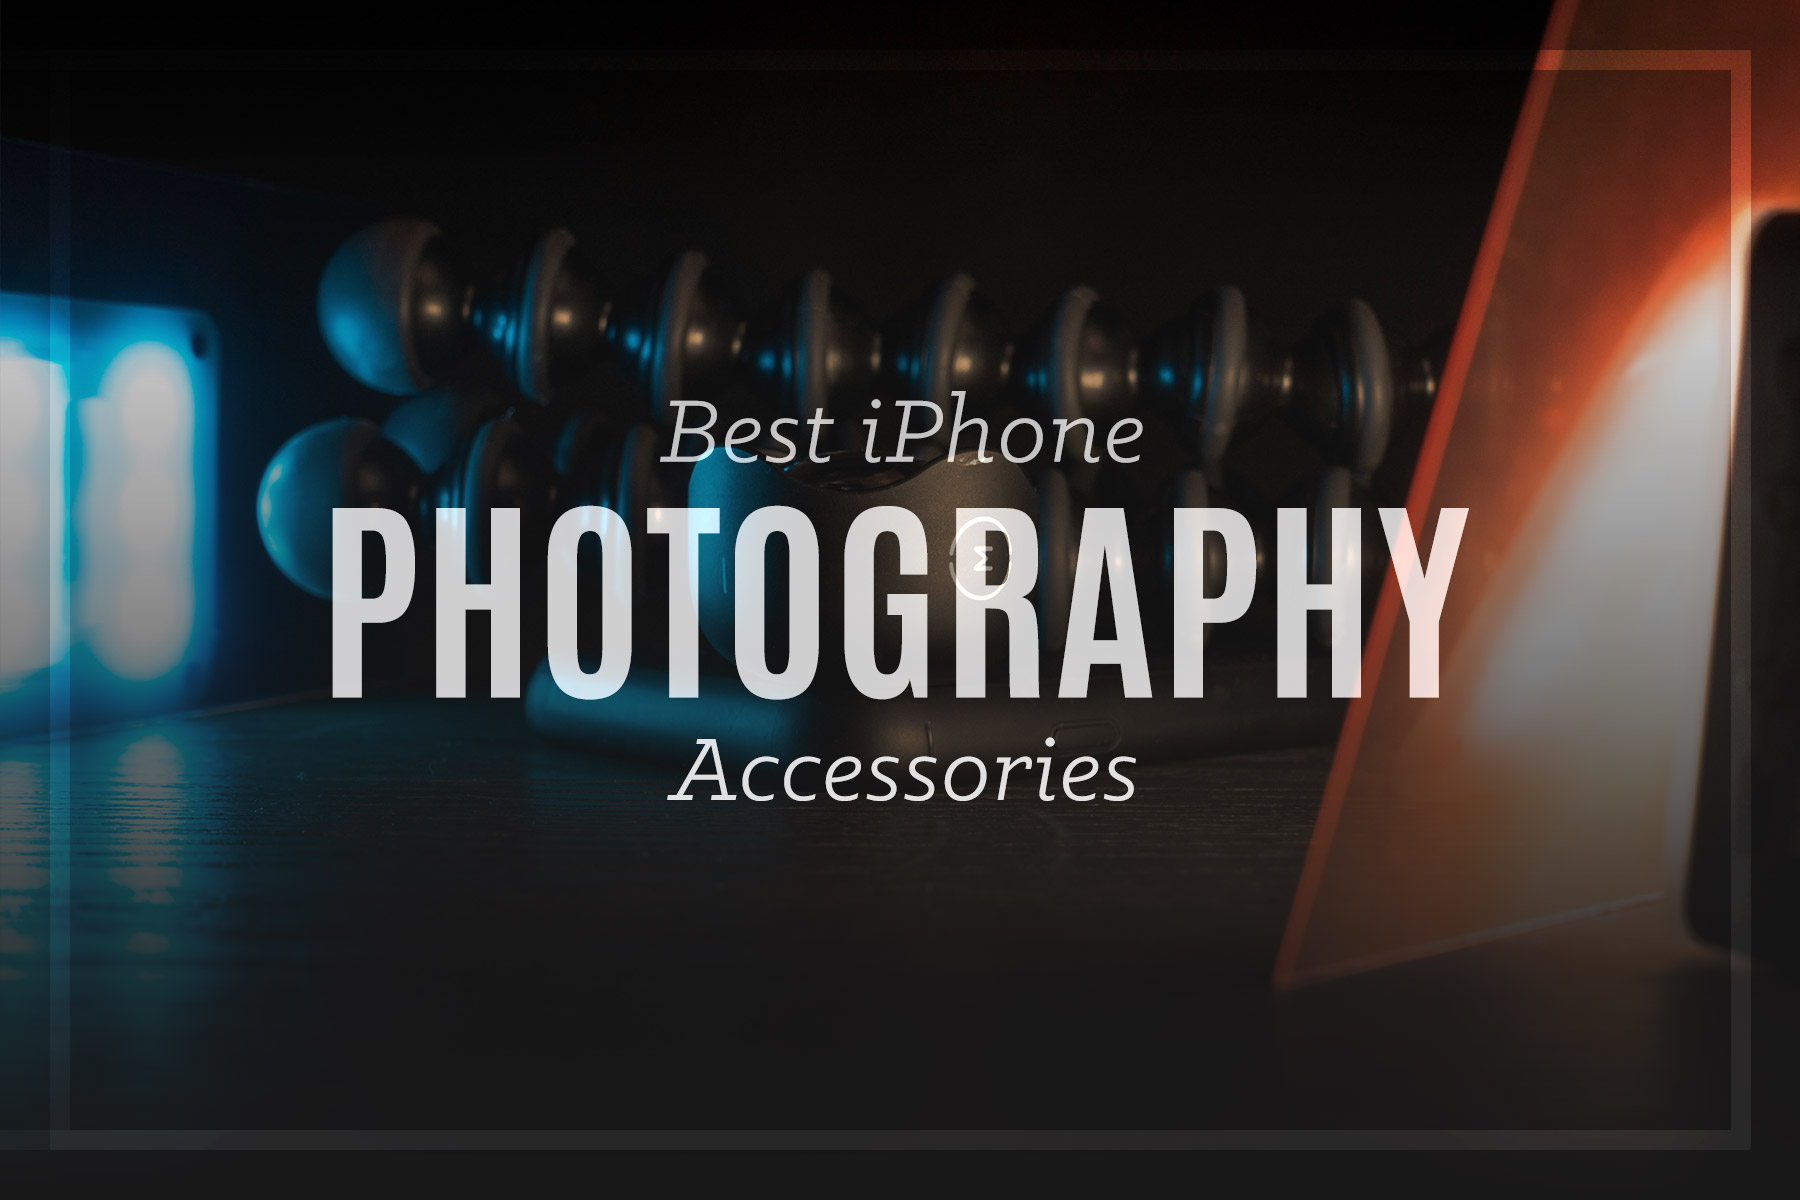 Best iPhone Photography Accessories